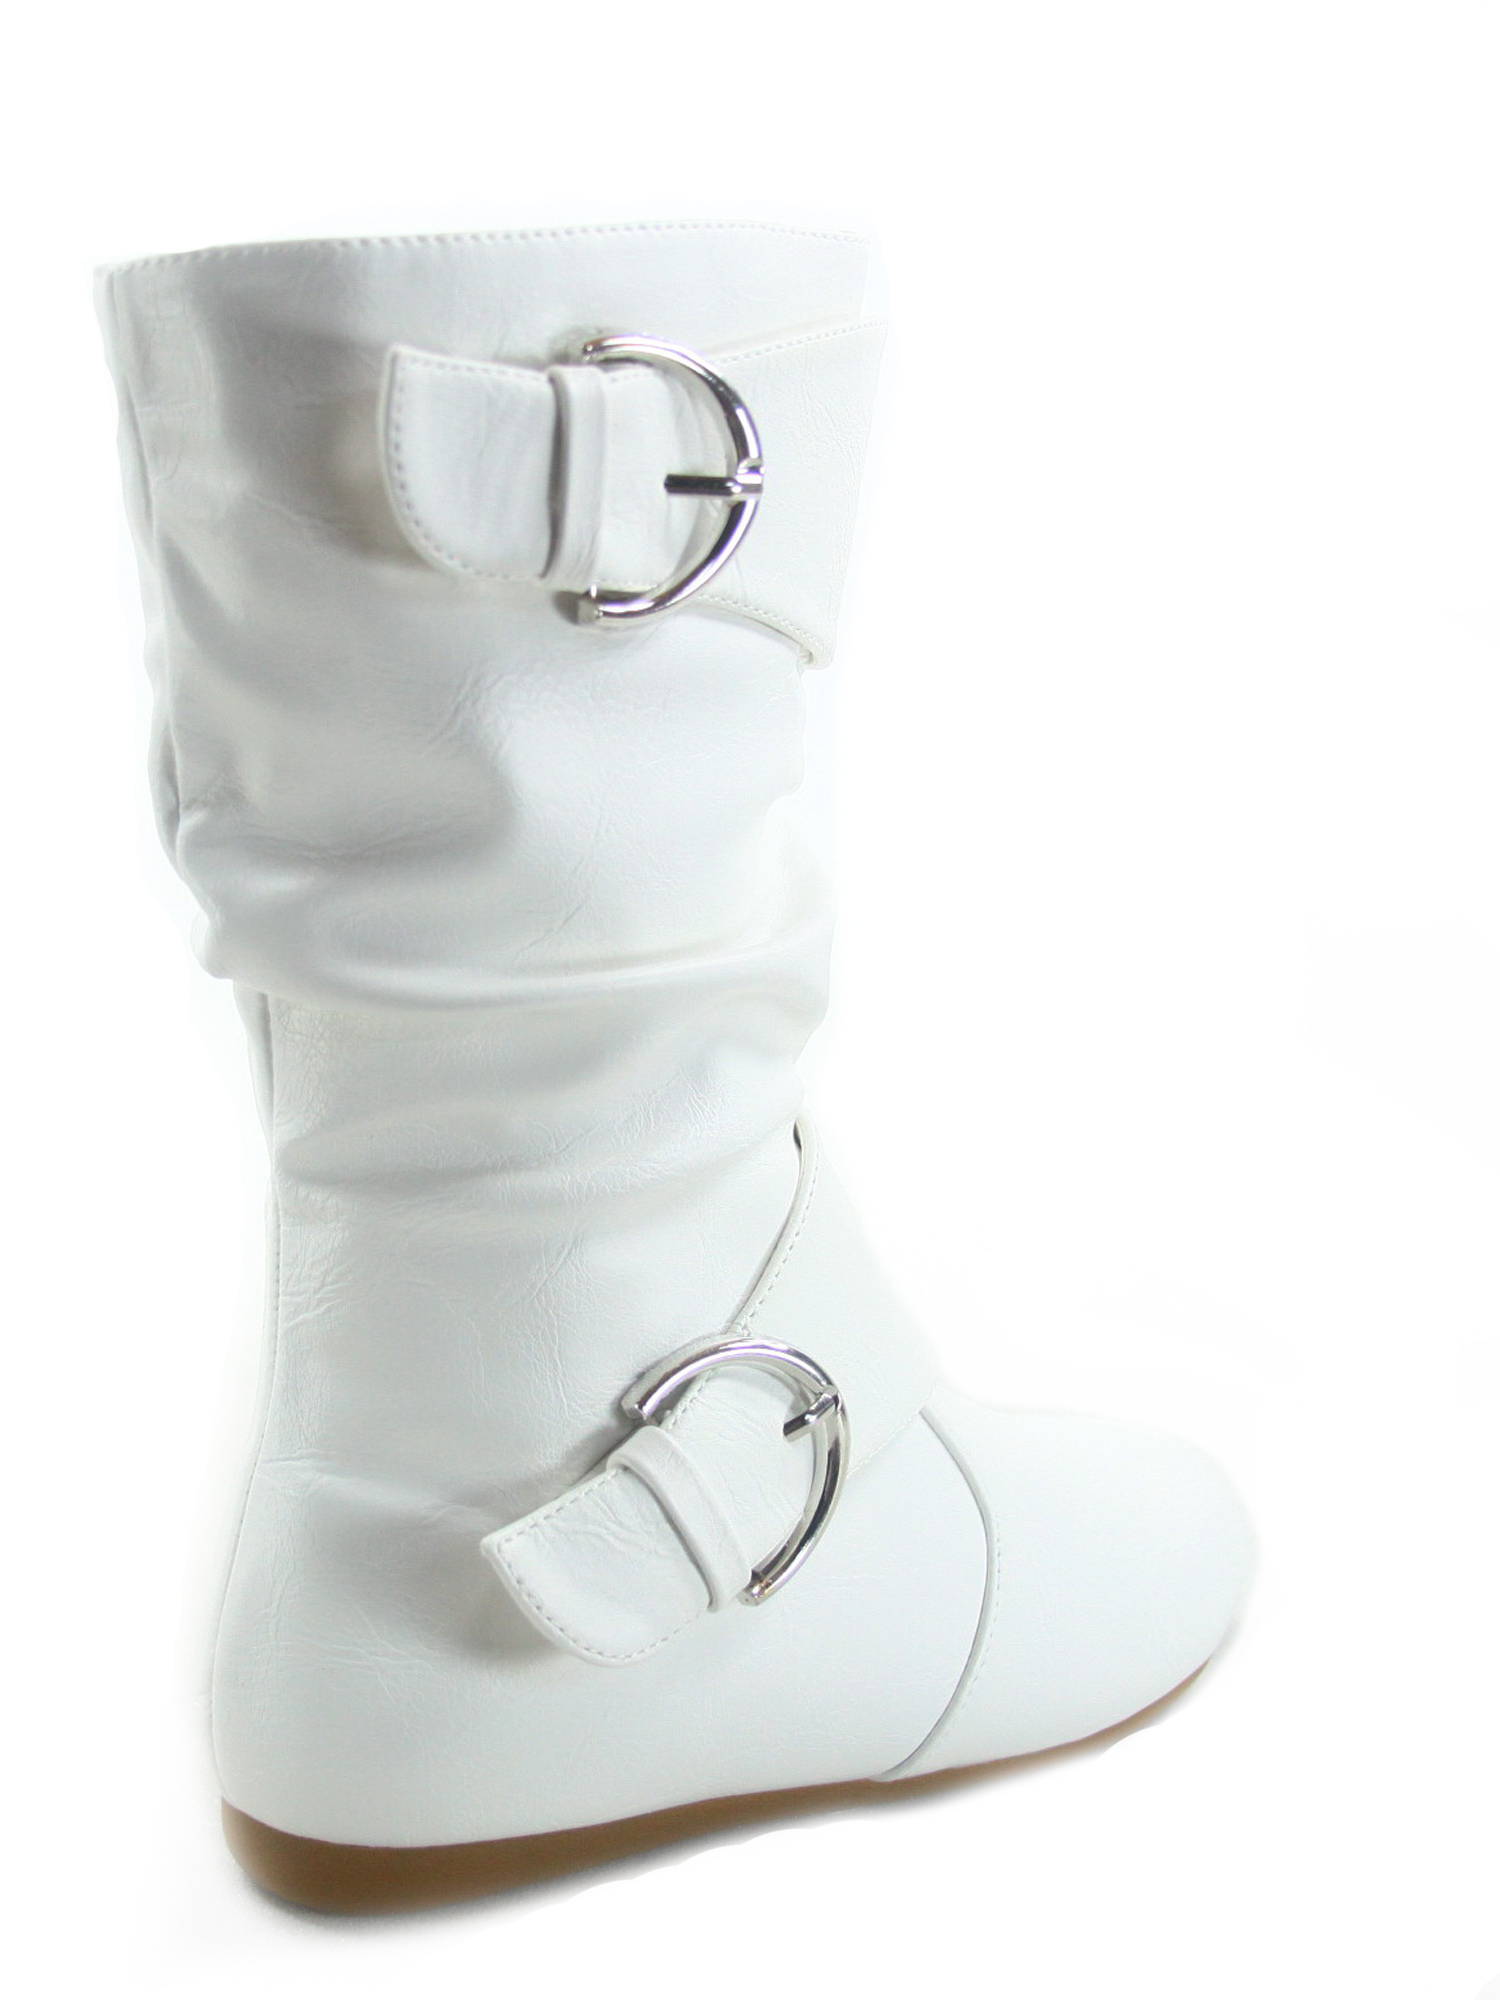 Klein-80k Girls Kid's Causal Round Toe Flat Heel Buckles Zipper Slouchy Mid Calf Boots Shoes ( White, 9 ) - image 2 of 2